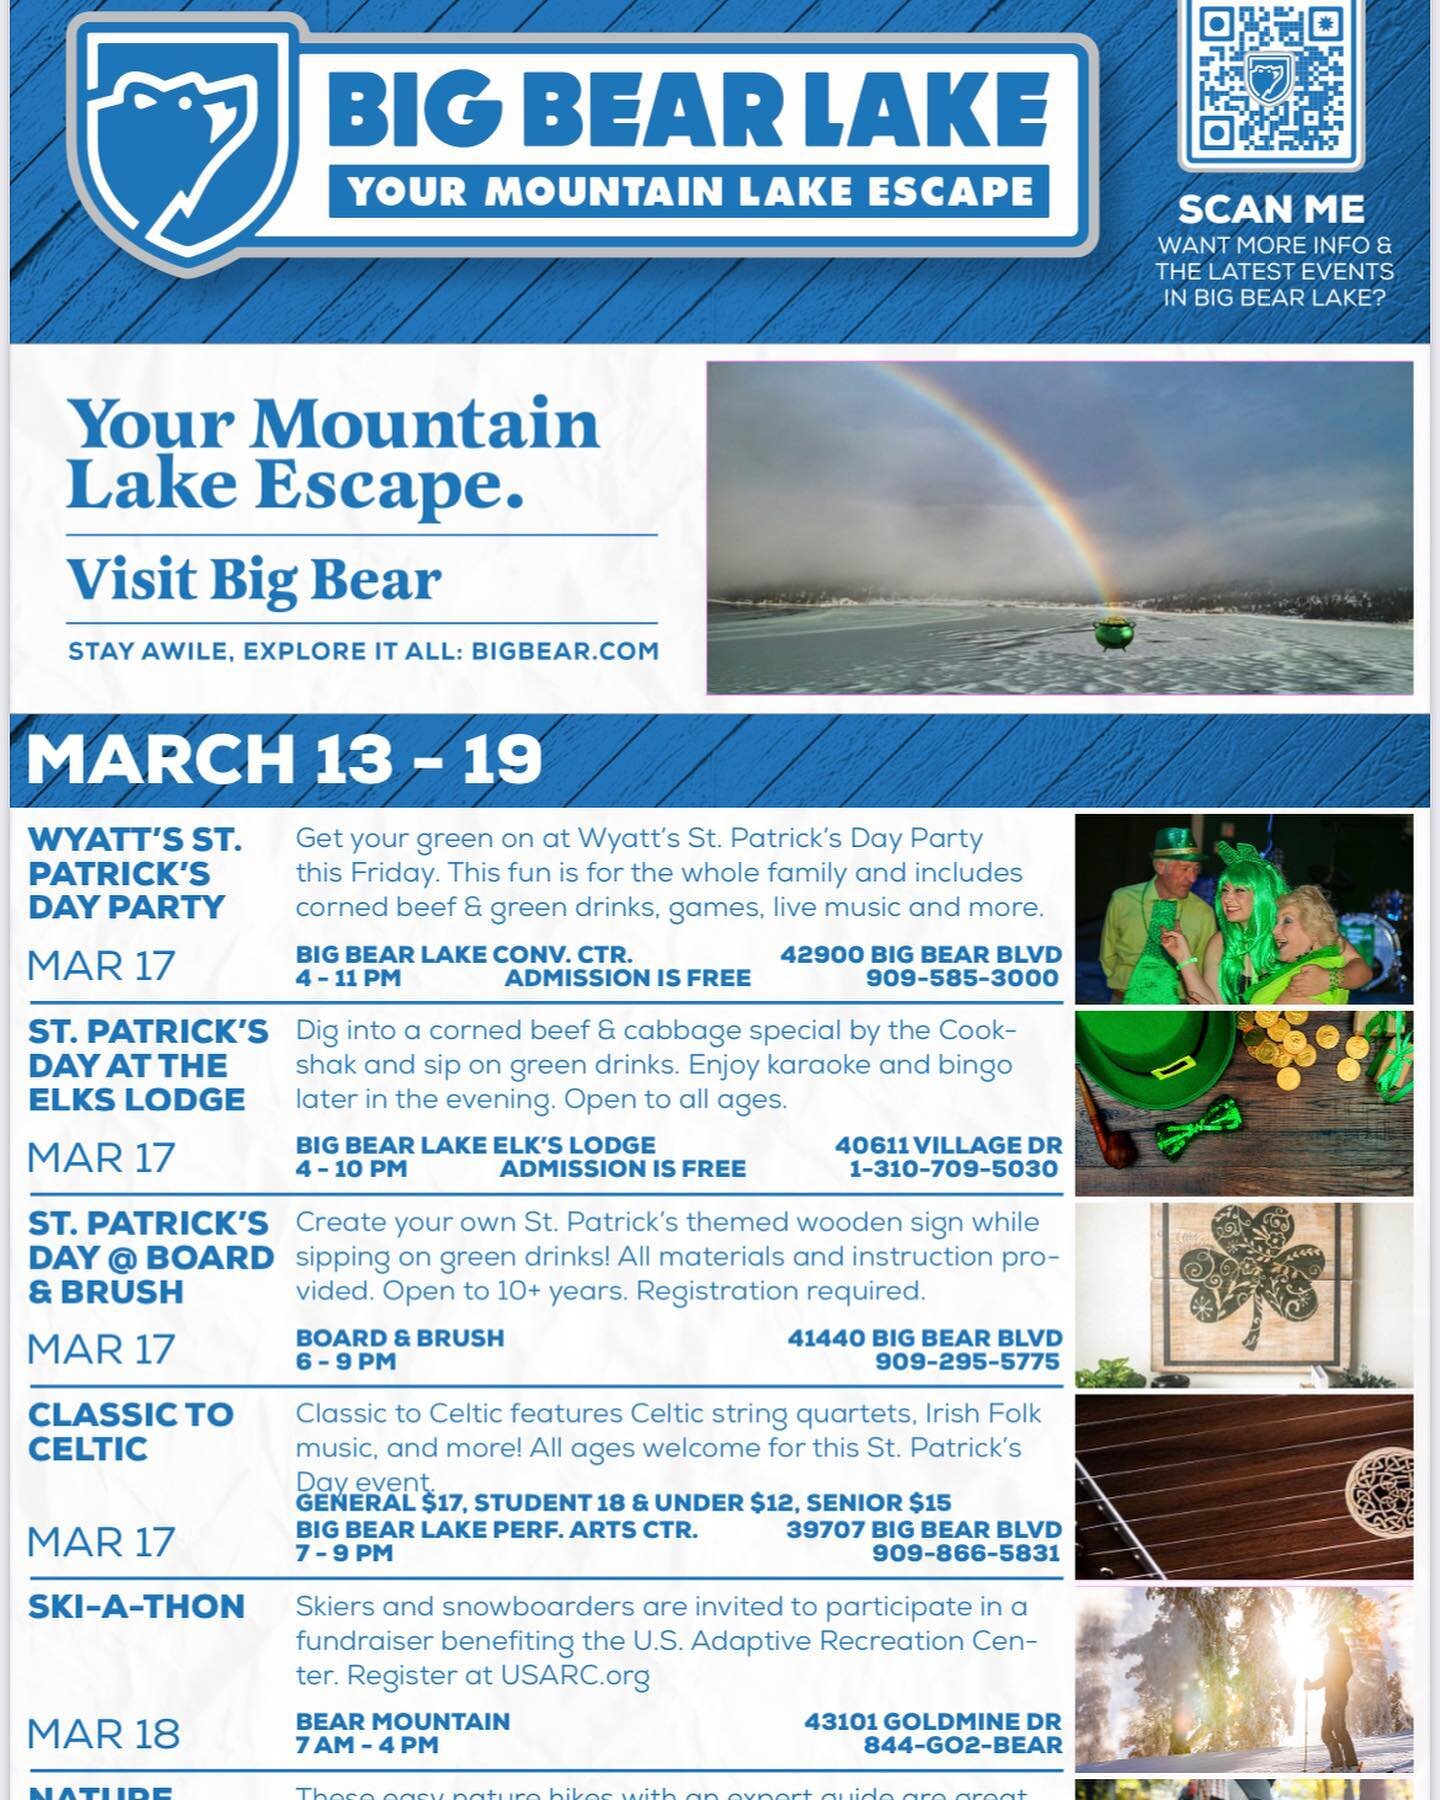 Big Bear Lake welcomes back guests to the mountain. Get on up here. Show your lodging receipt and pick up your free vouchers. See the flyer for all the info. Book at bigbearvillagecabins.com/cabins